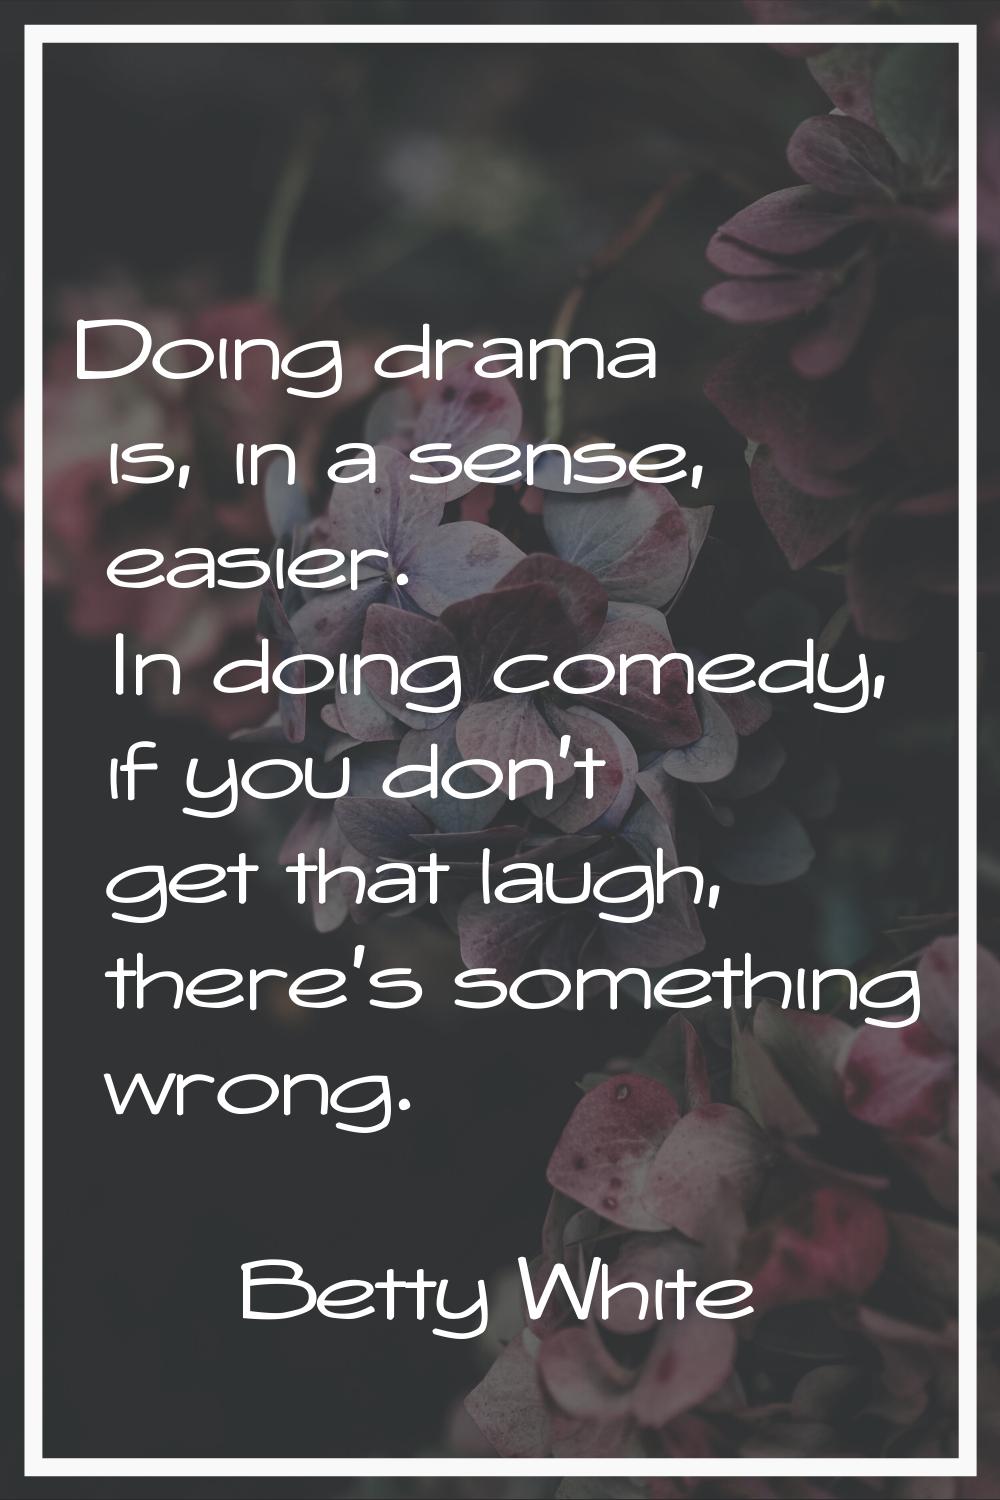 Doing drama is, in a sense, easier. In doing comedy, if you don't get that laugh, there's something